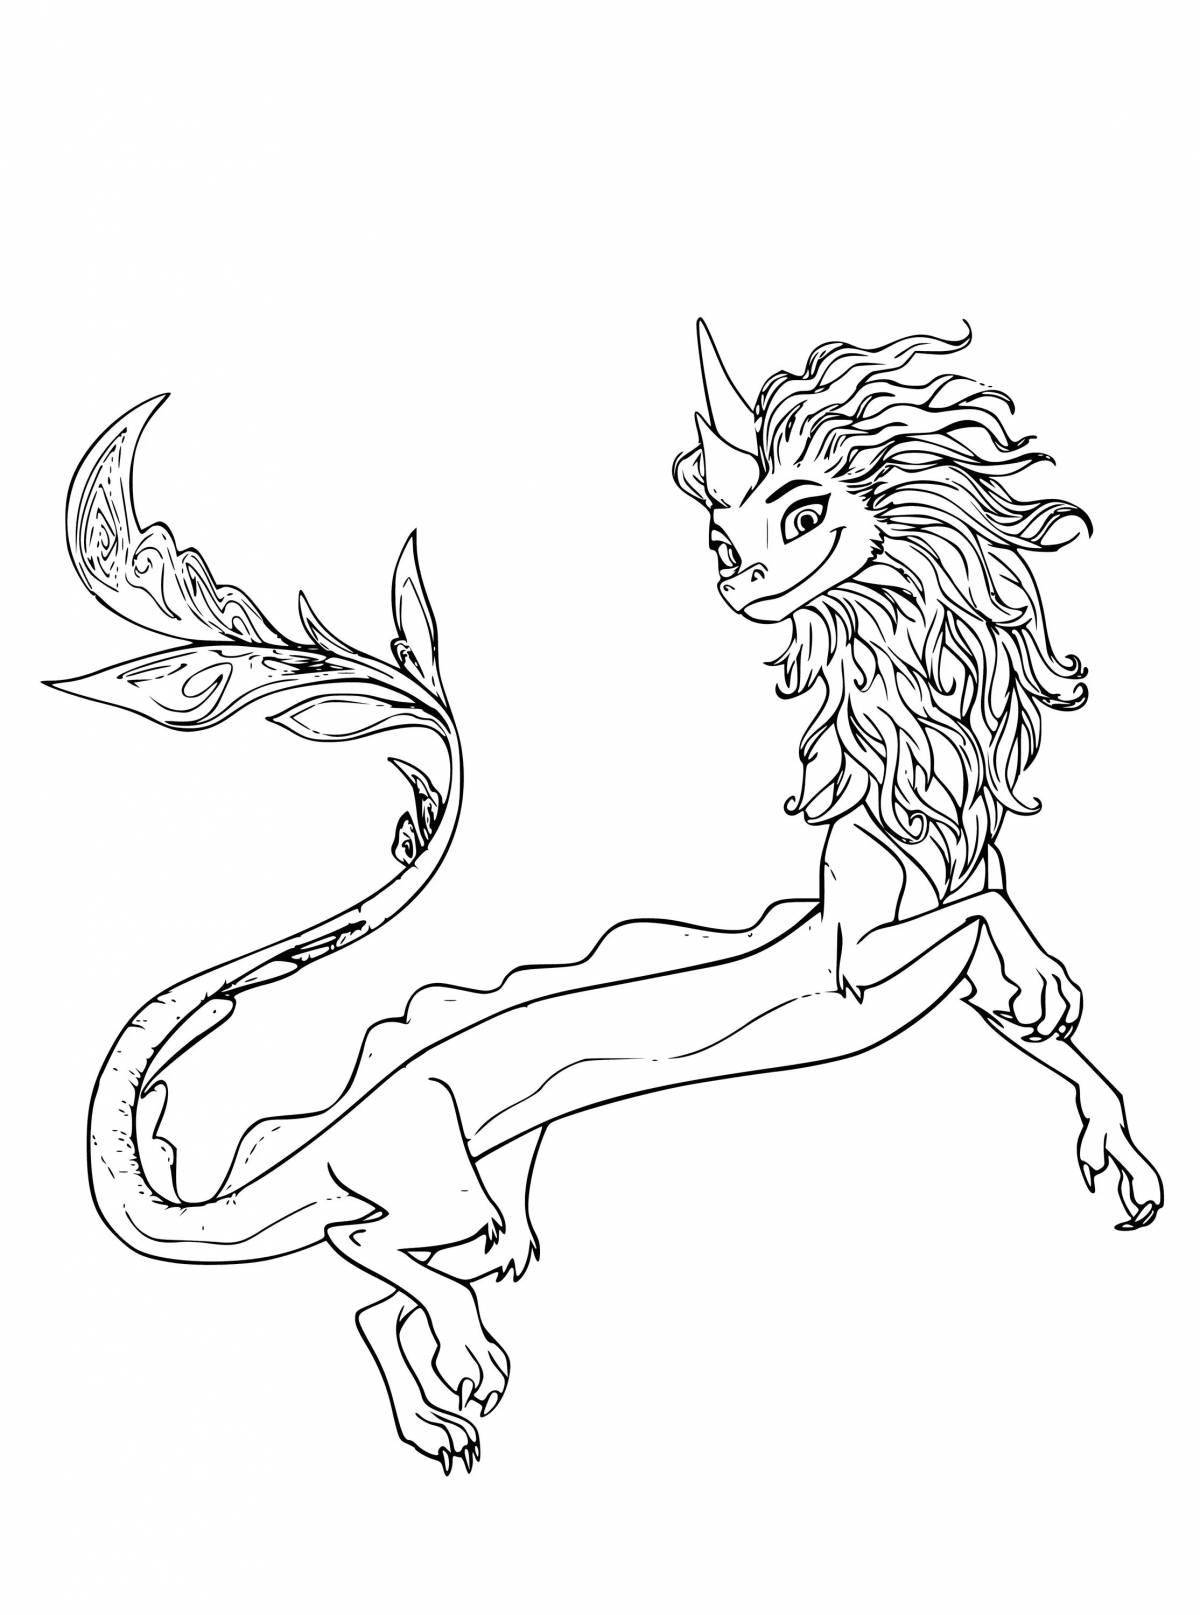 Coloring page magnanimous last dragon